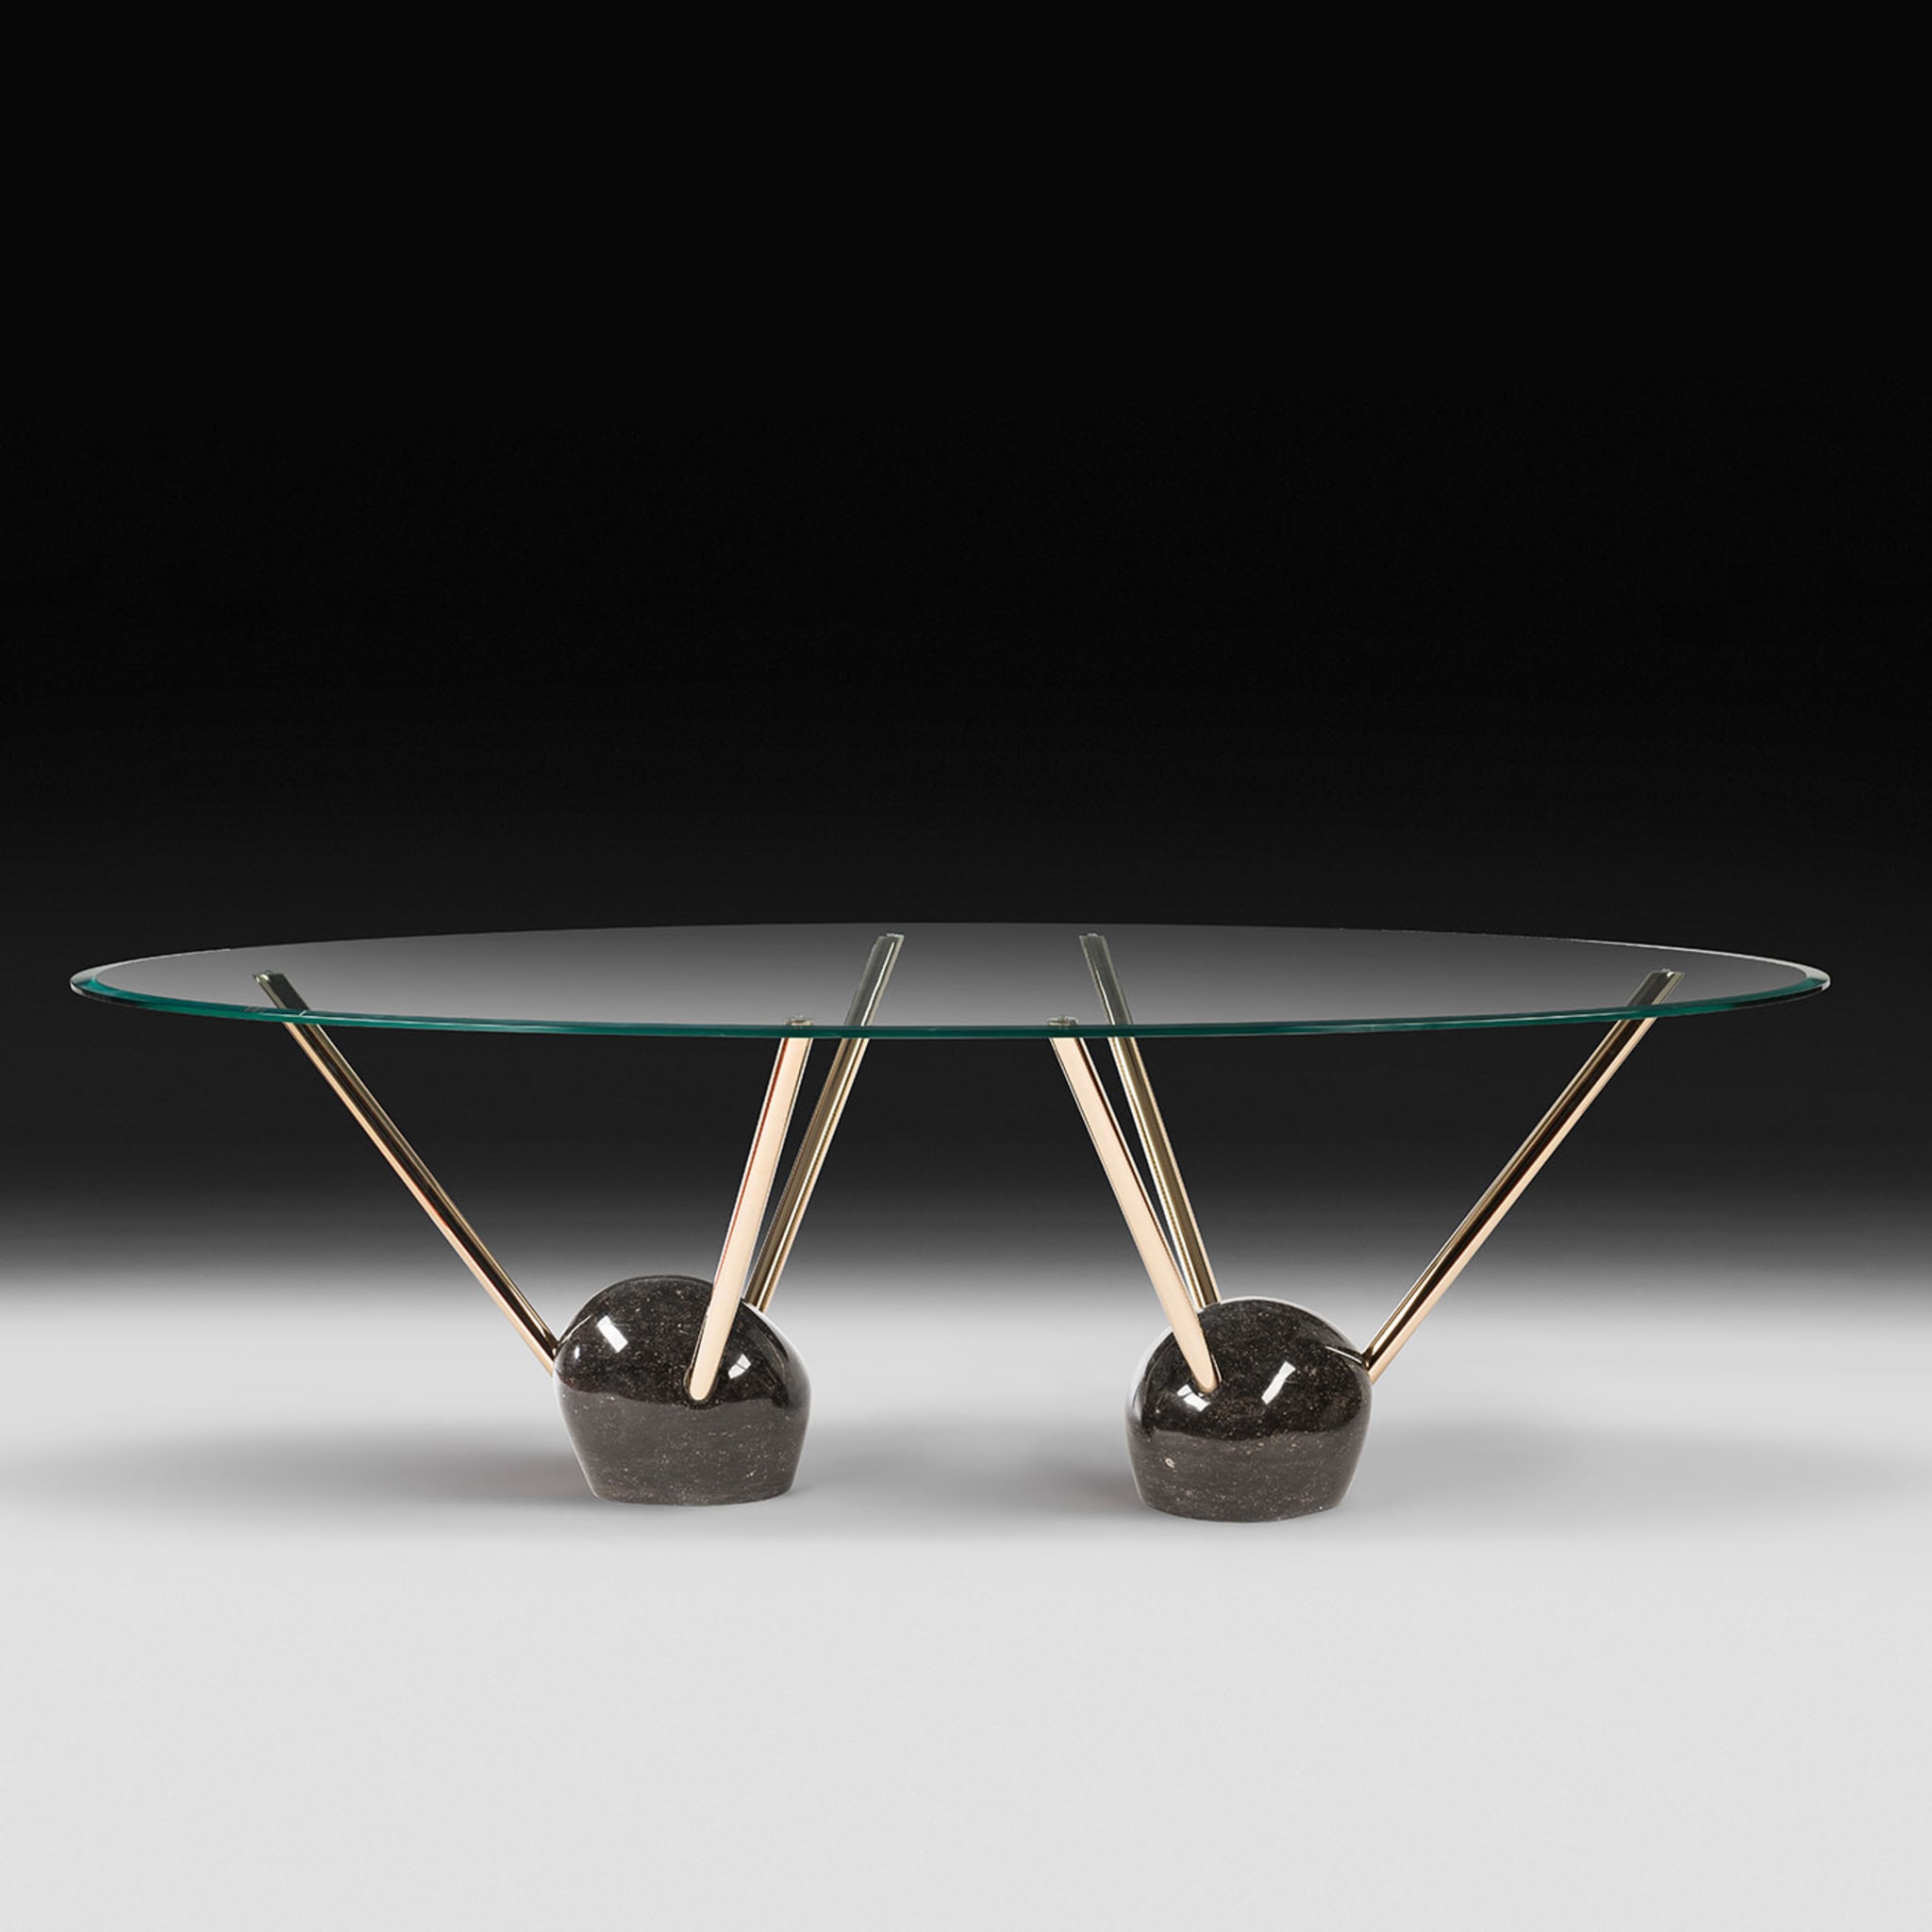 Rays Glass Top Dining Table - Alternative view 1